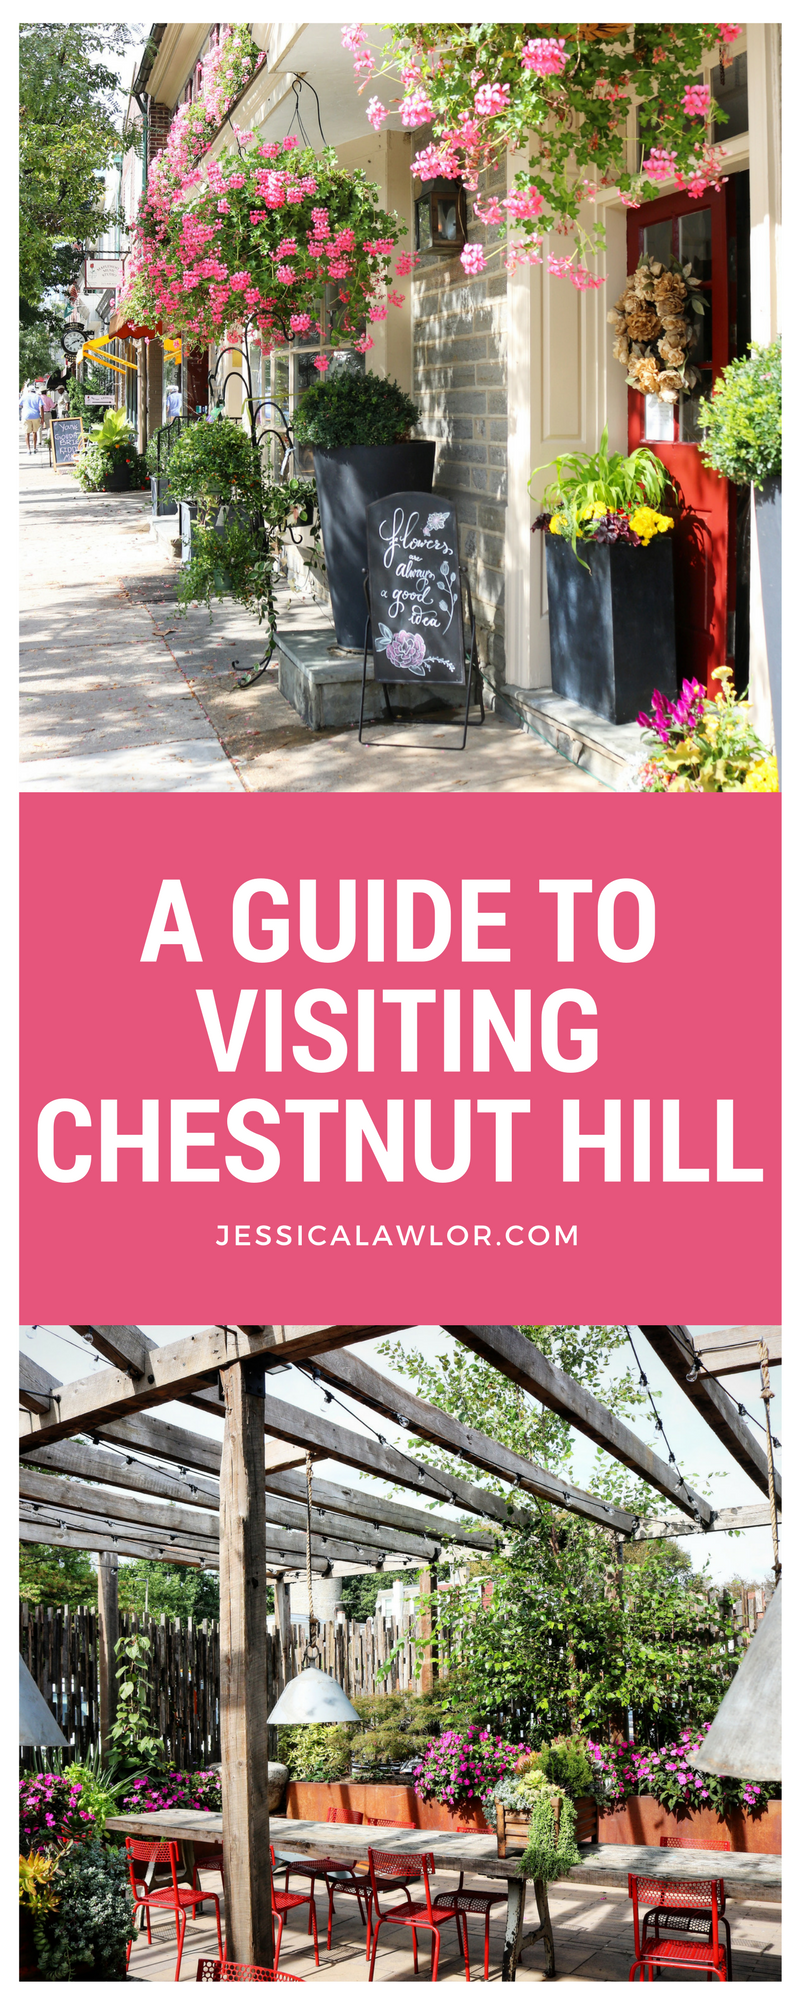 A slice of charm in Philadelphia! If you're planning a visit to Chestnut Hill, discover the best places to eat, drink and play in Philadelphia's Garden District.